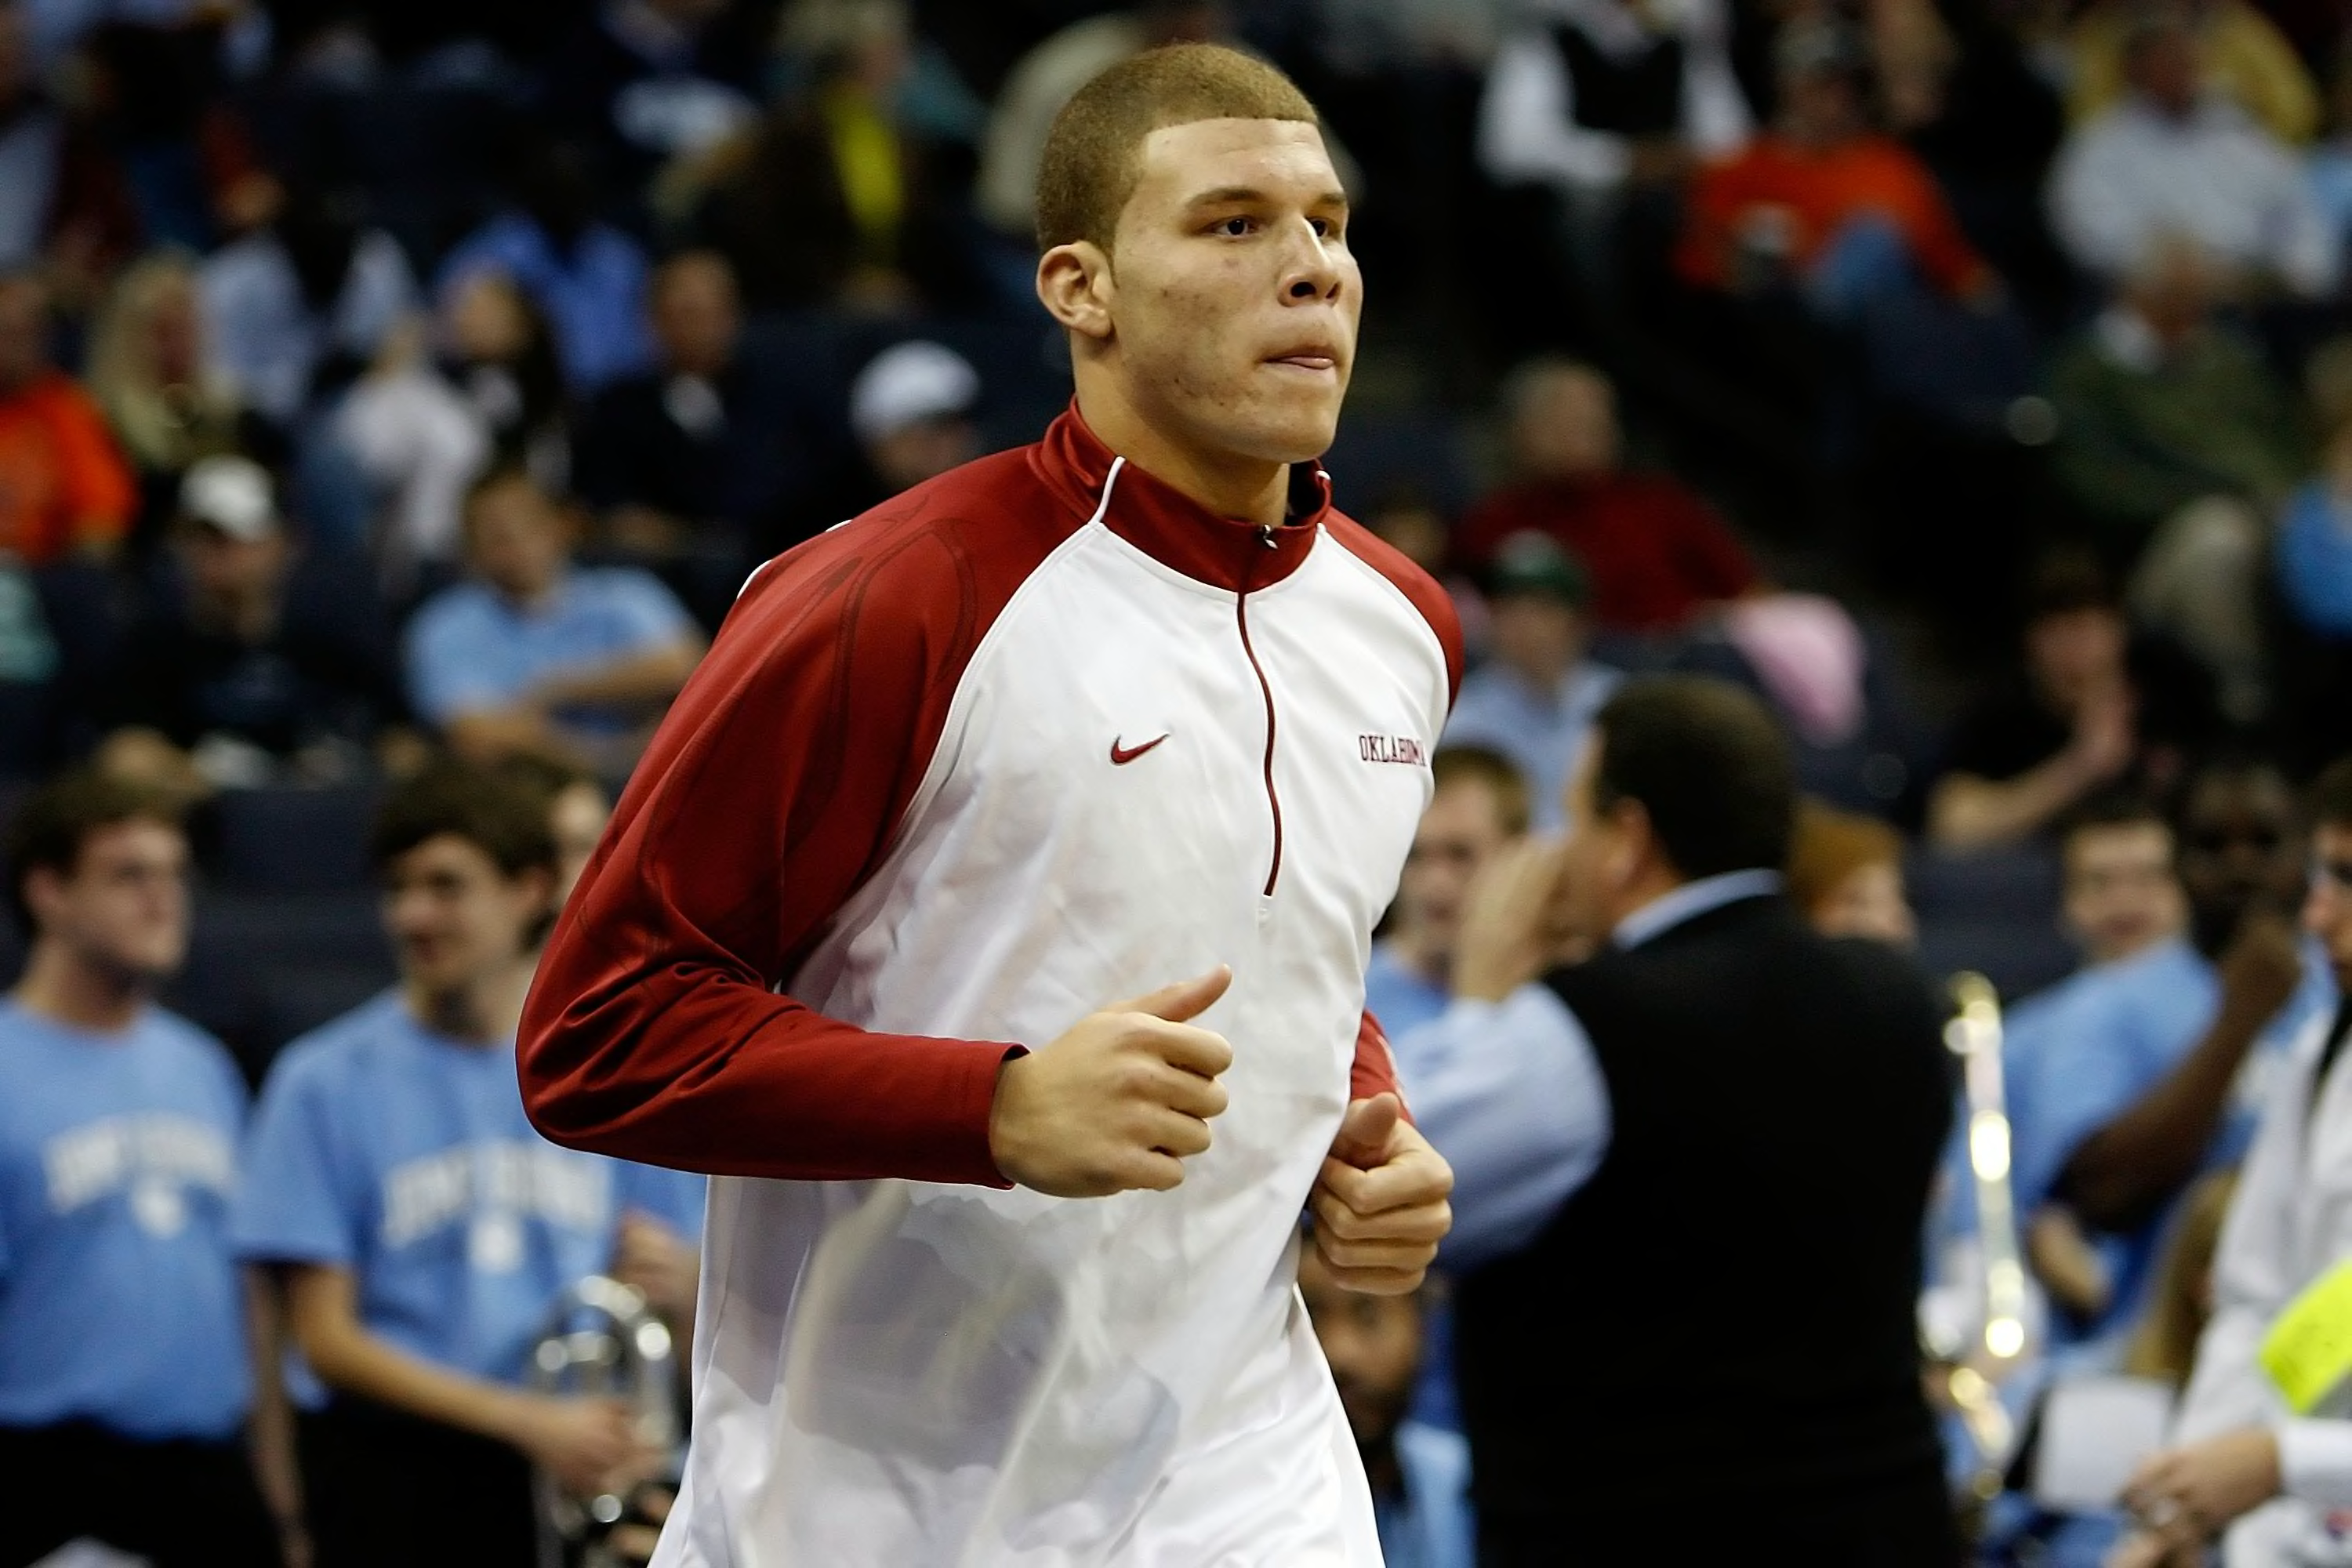 Blake Griffin highlights: NCAA tournament top plays